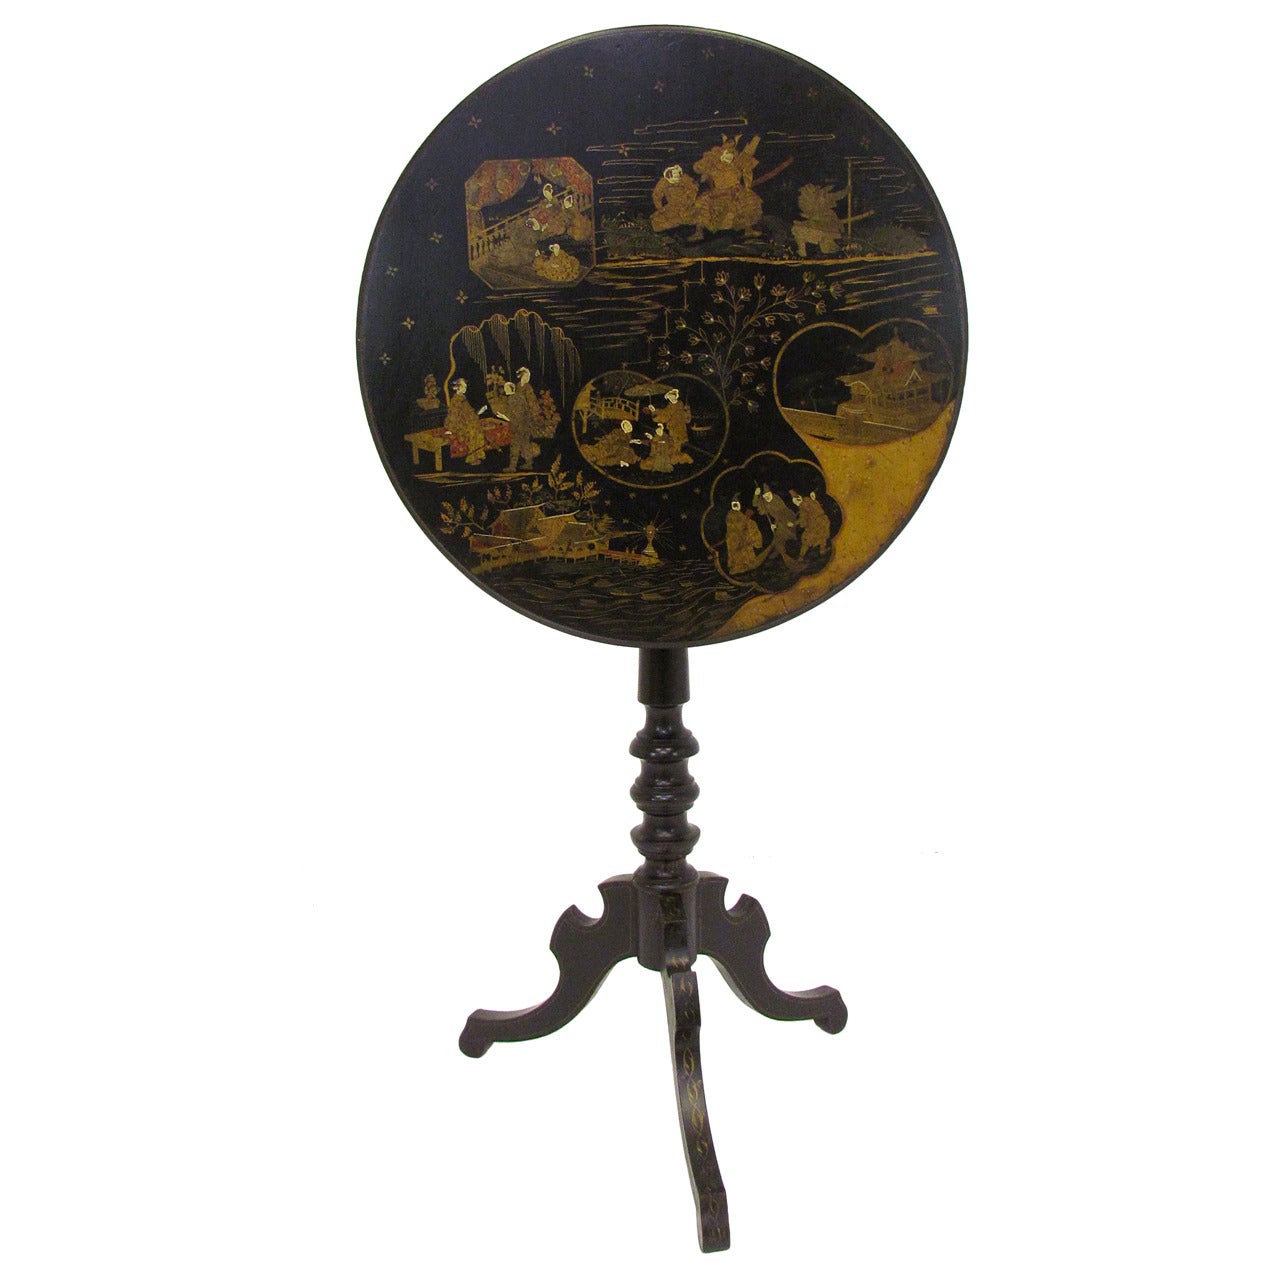 Late 19th c. Japanned Tilt Top Tea Table with Lacquered Scenes